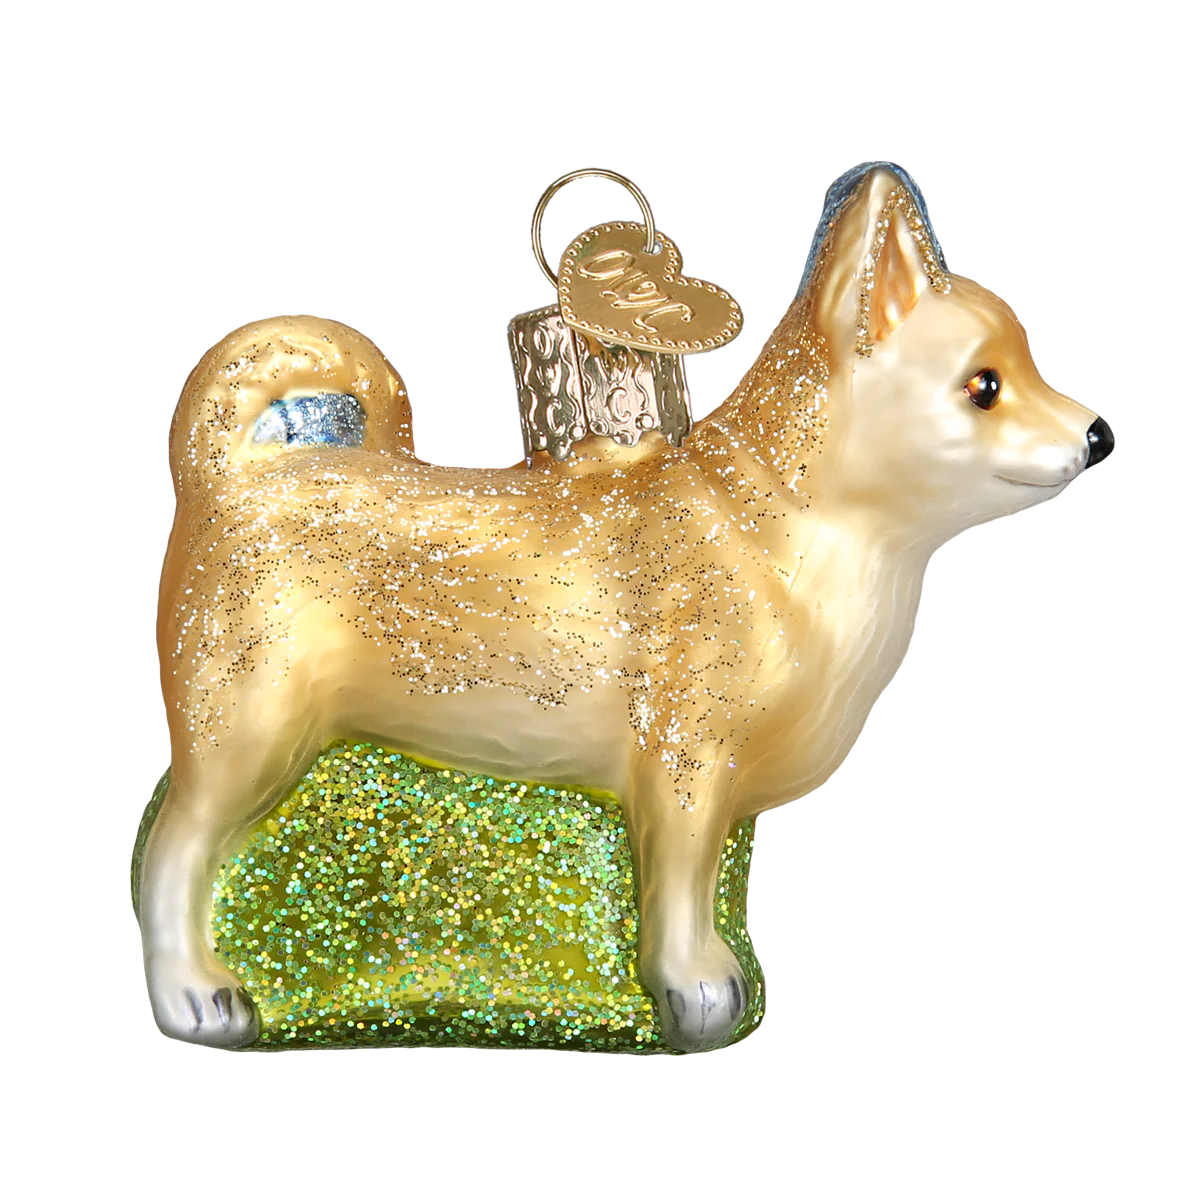 Chihuahua Ornament  Old World Christmas   